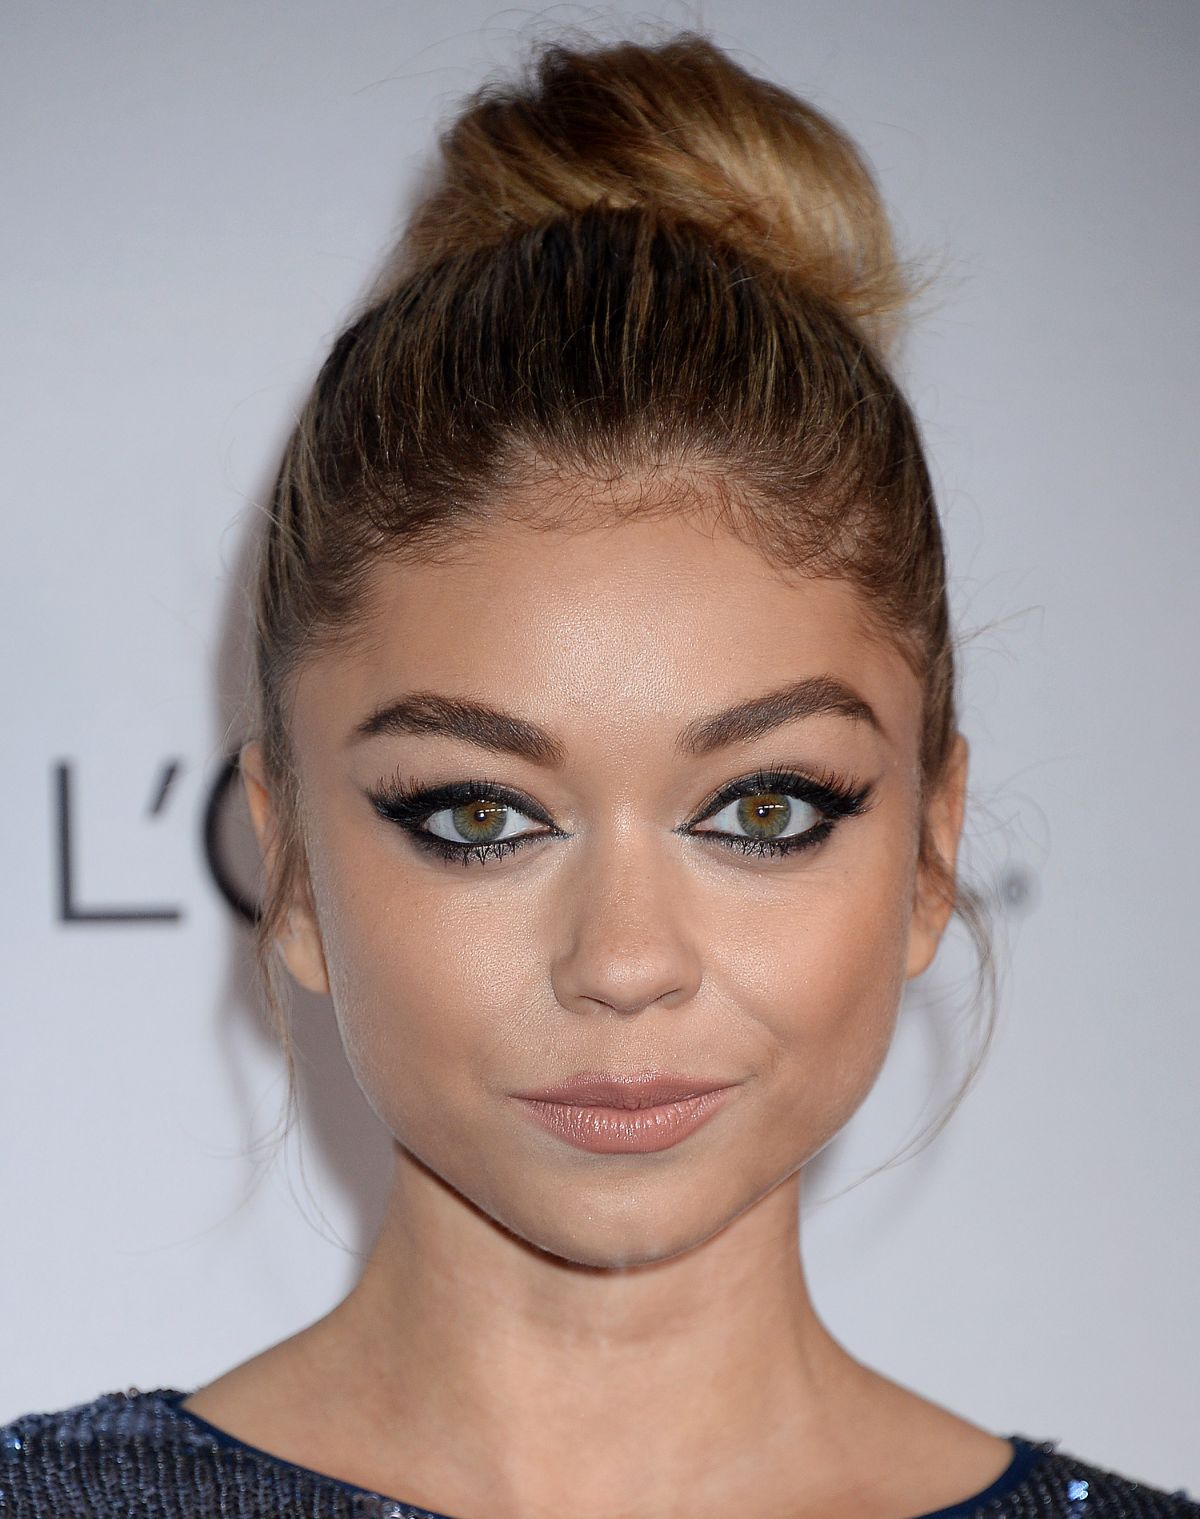 SARAH HYLAND at Entertainment Weekly 2016 Pre-emmy Party in Los Angeles ...